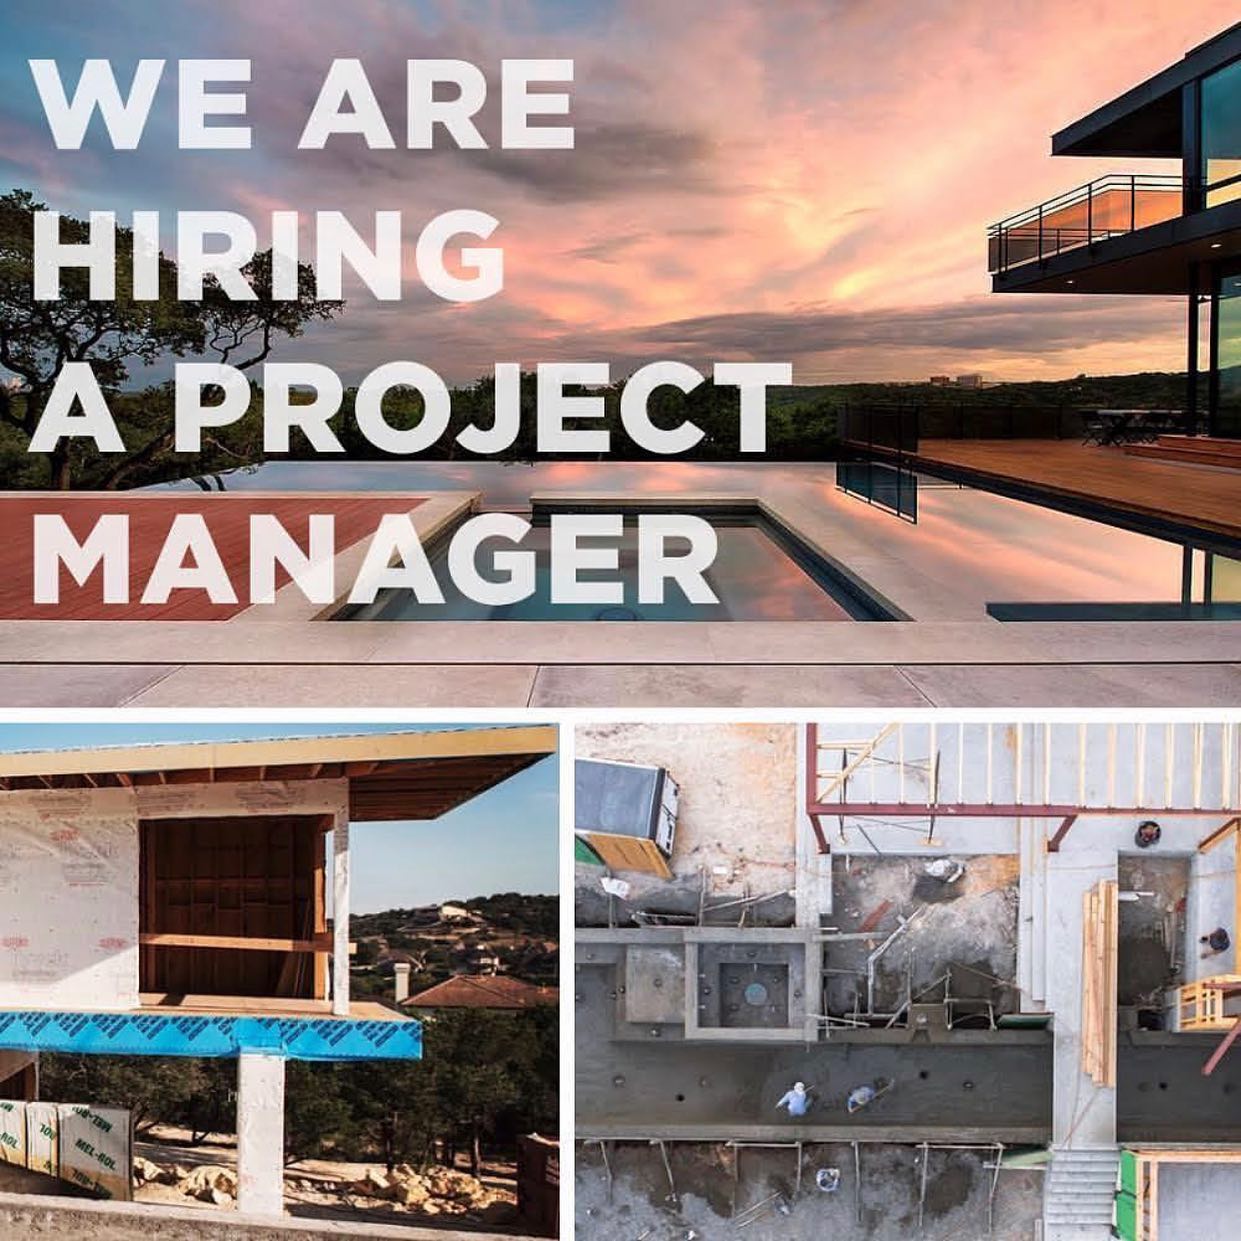 If you’re a seasoned Project Manager or Superintendent then please give us a call. We have lots of great projects to build and are looking for those who want to be a part of a team of professionals.